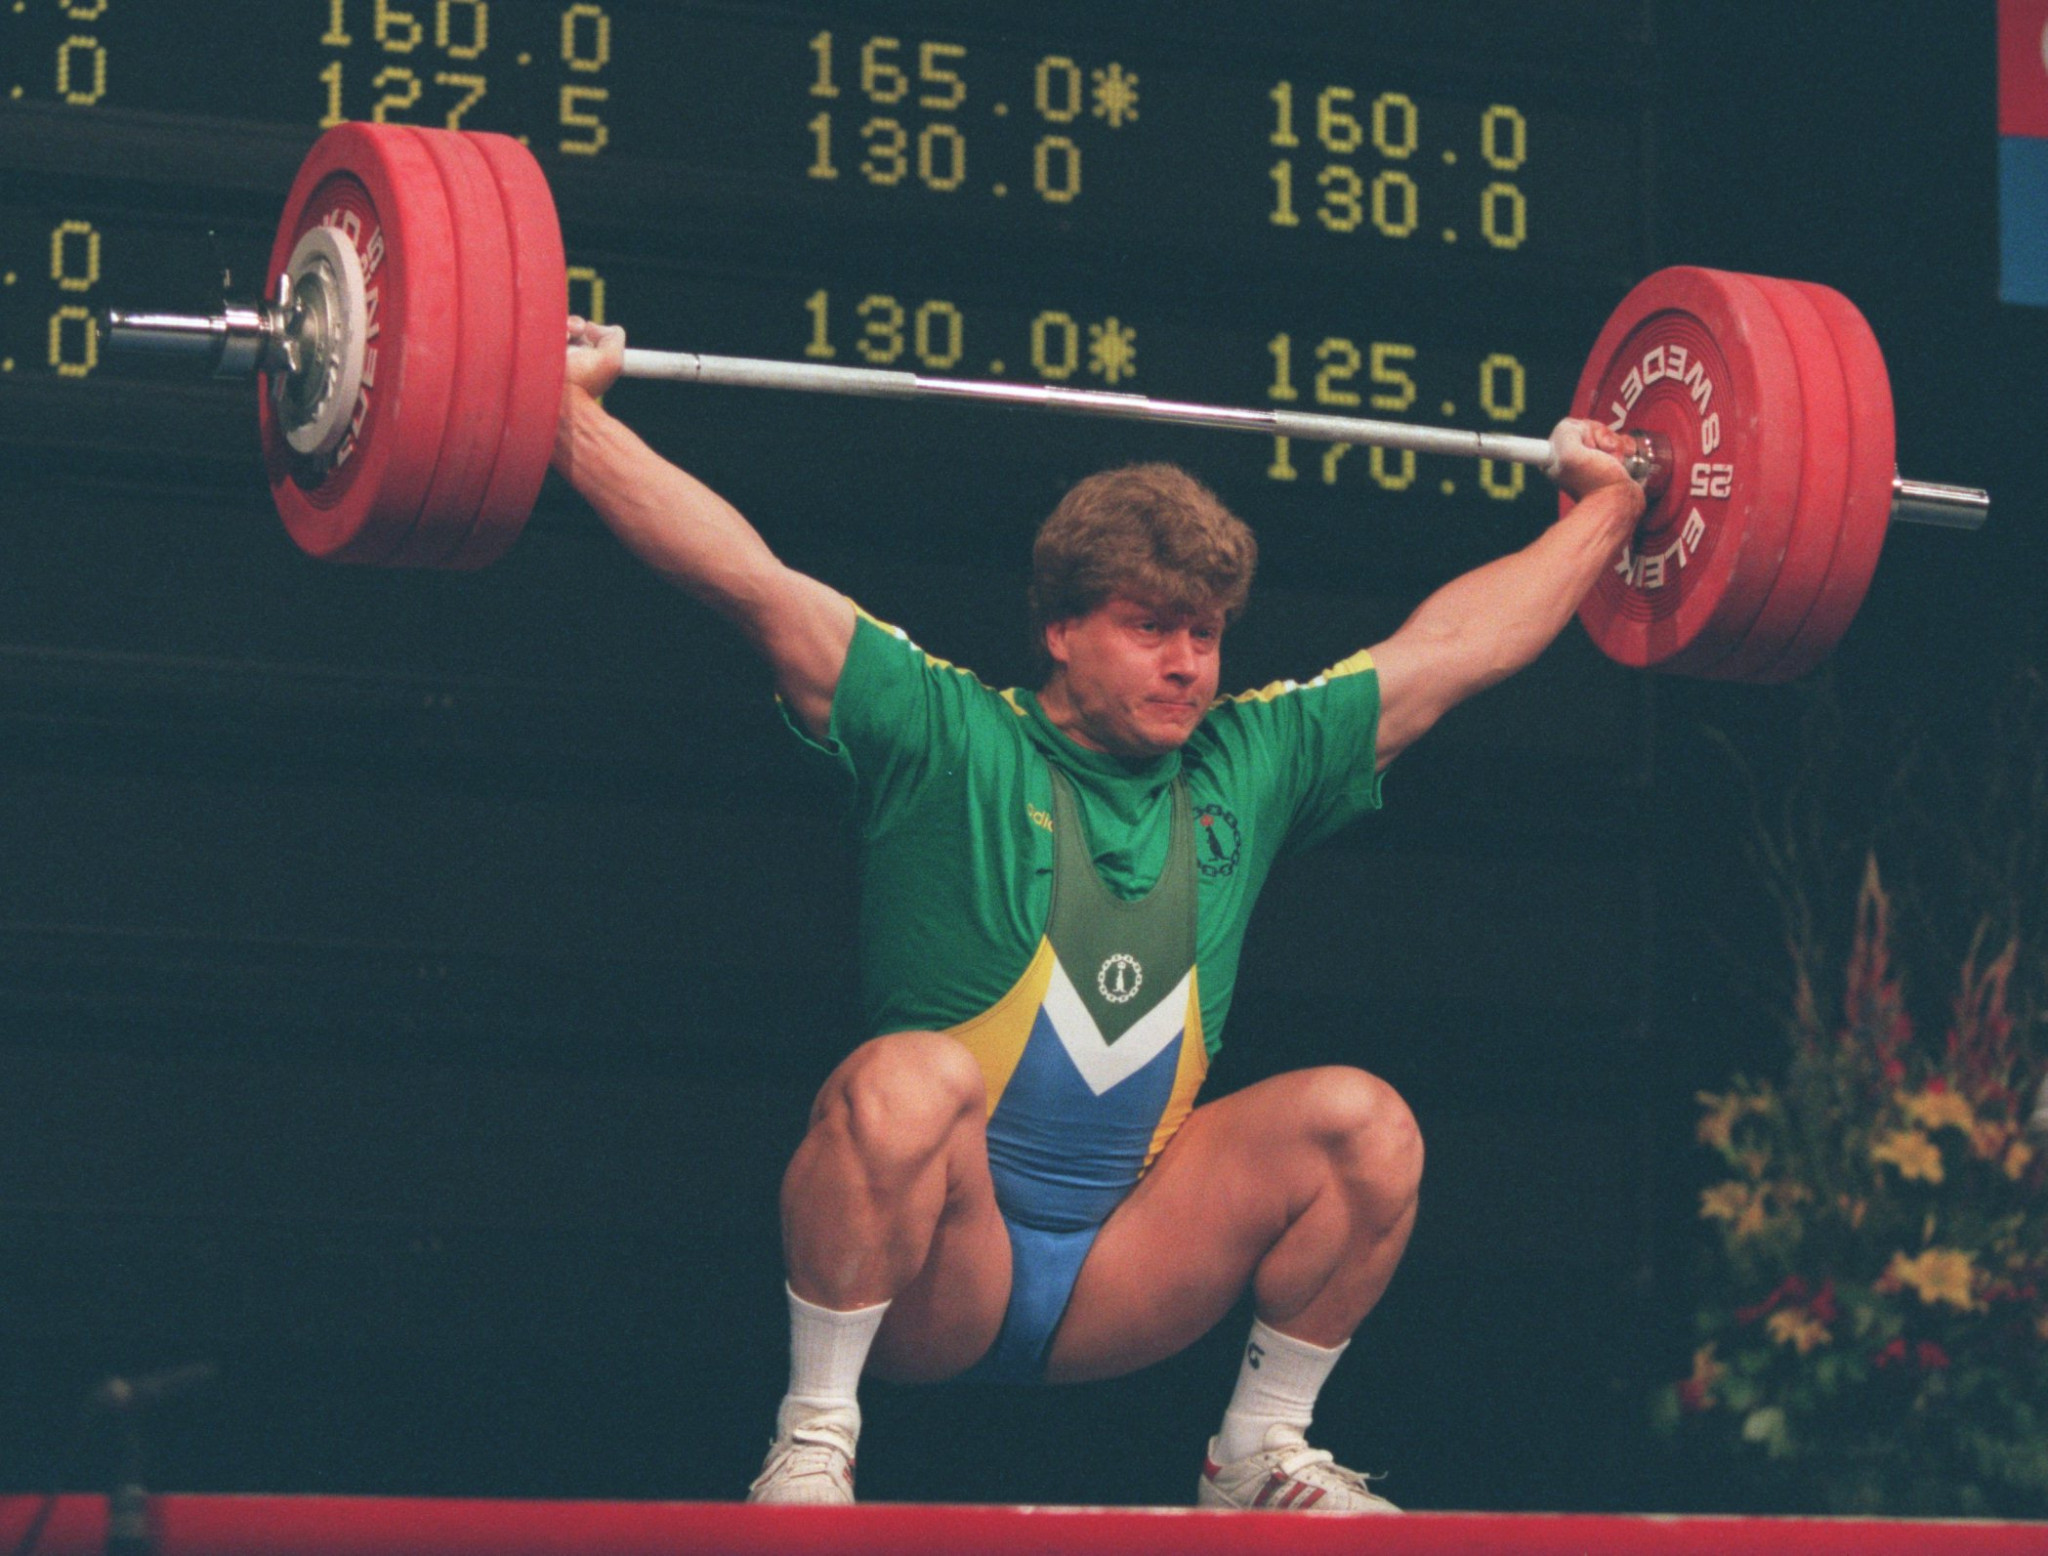 Nicu Vlad, pictured above, a former weightlifter himself, is now president of the Romanian Weightlifting Federation, and requested the postponement of the World Junior Championships ©Getty Images